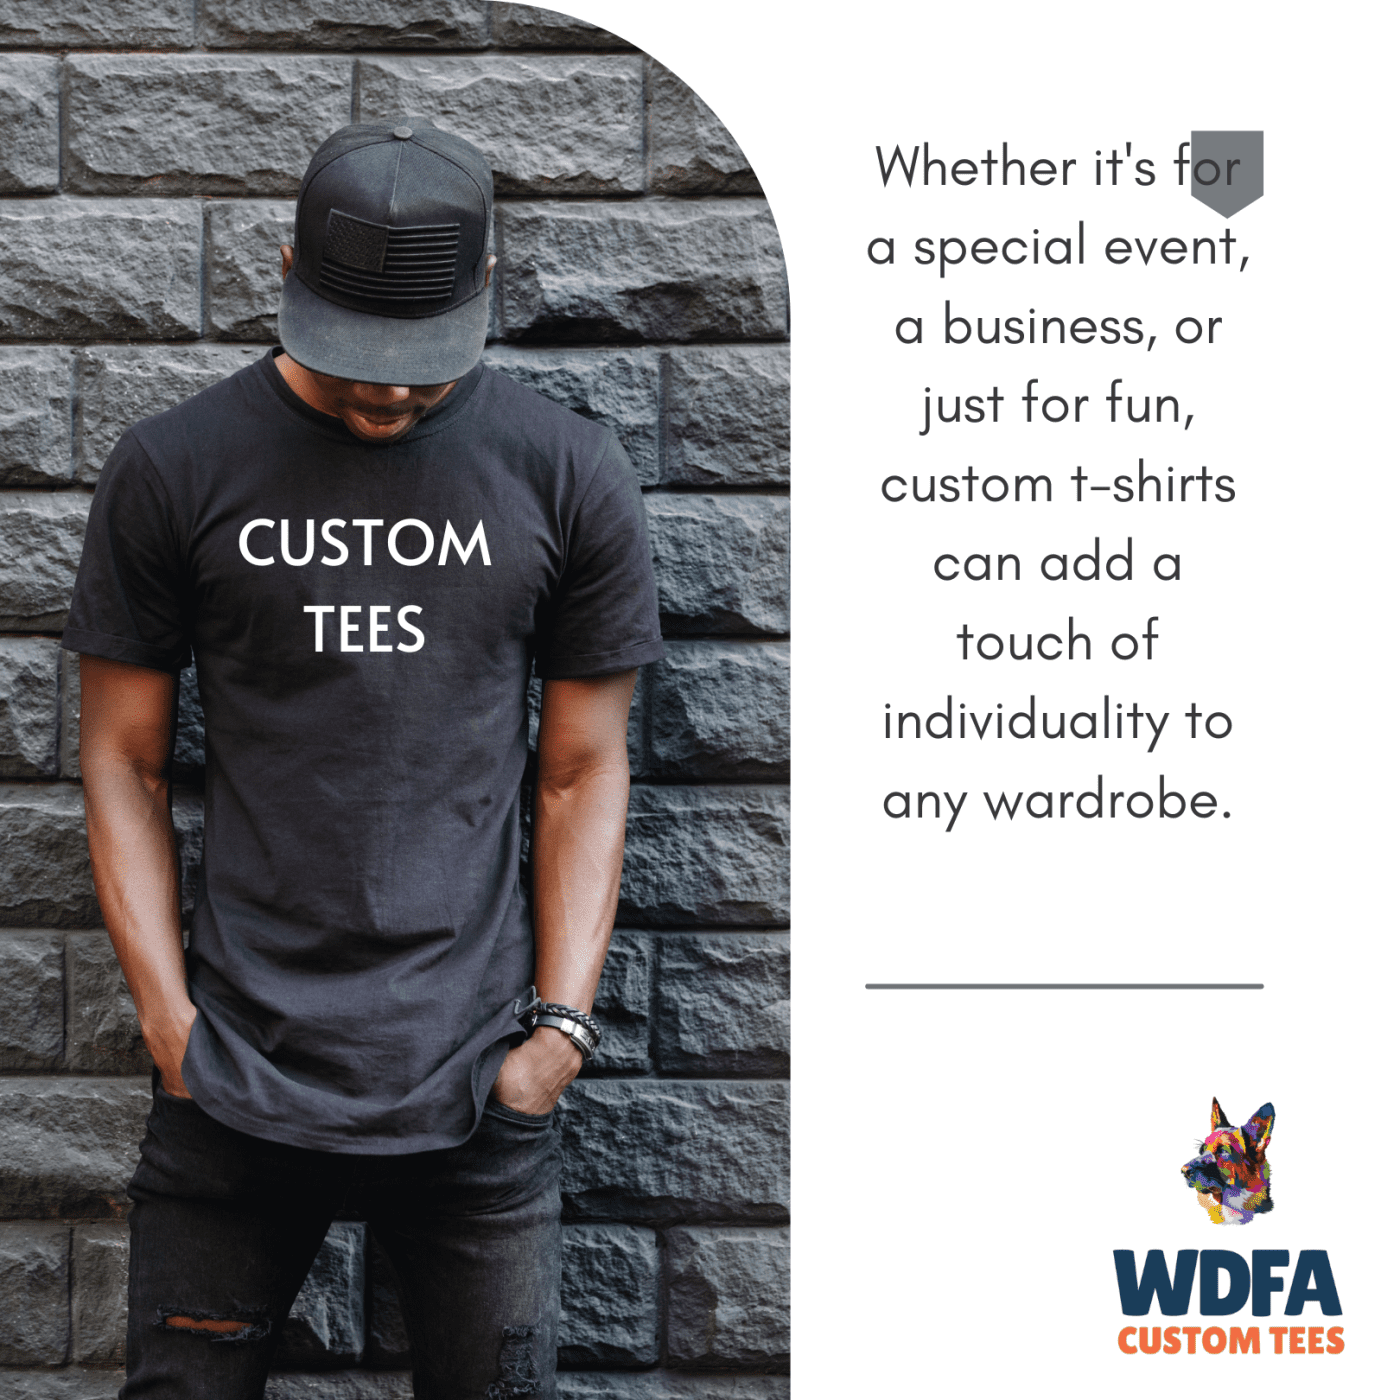 The Benefits of Customizing Your Own T-Shirts (Customizing Your Own T-Shirts ), custom t-shirts, t-shirt printing, custom t shirts, t shirt printing